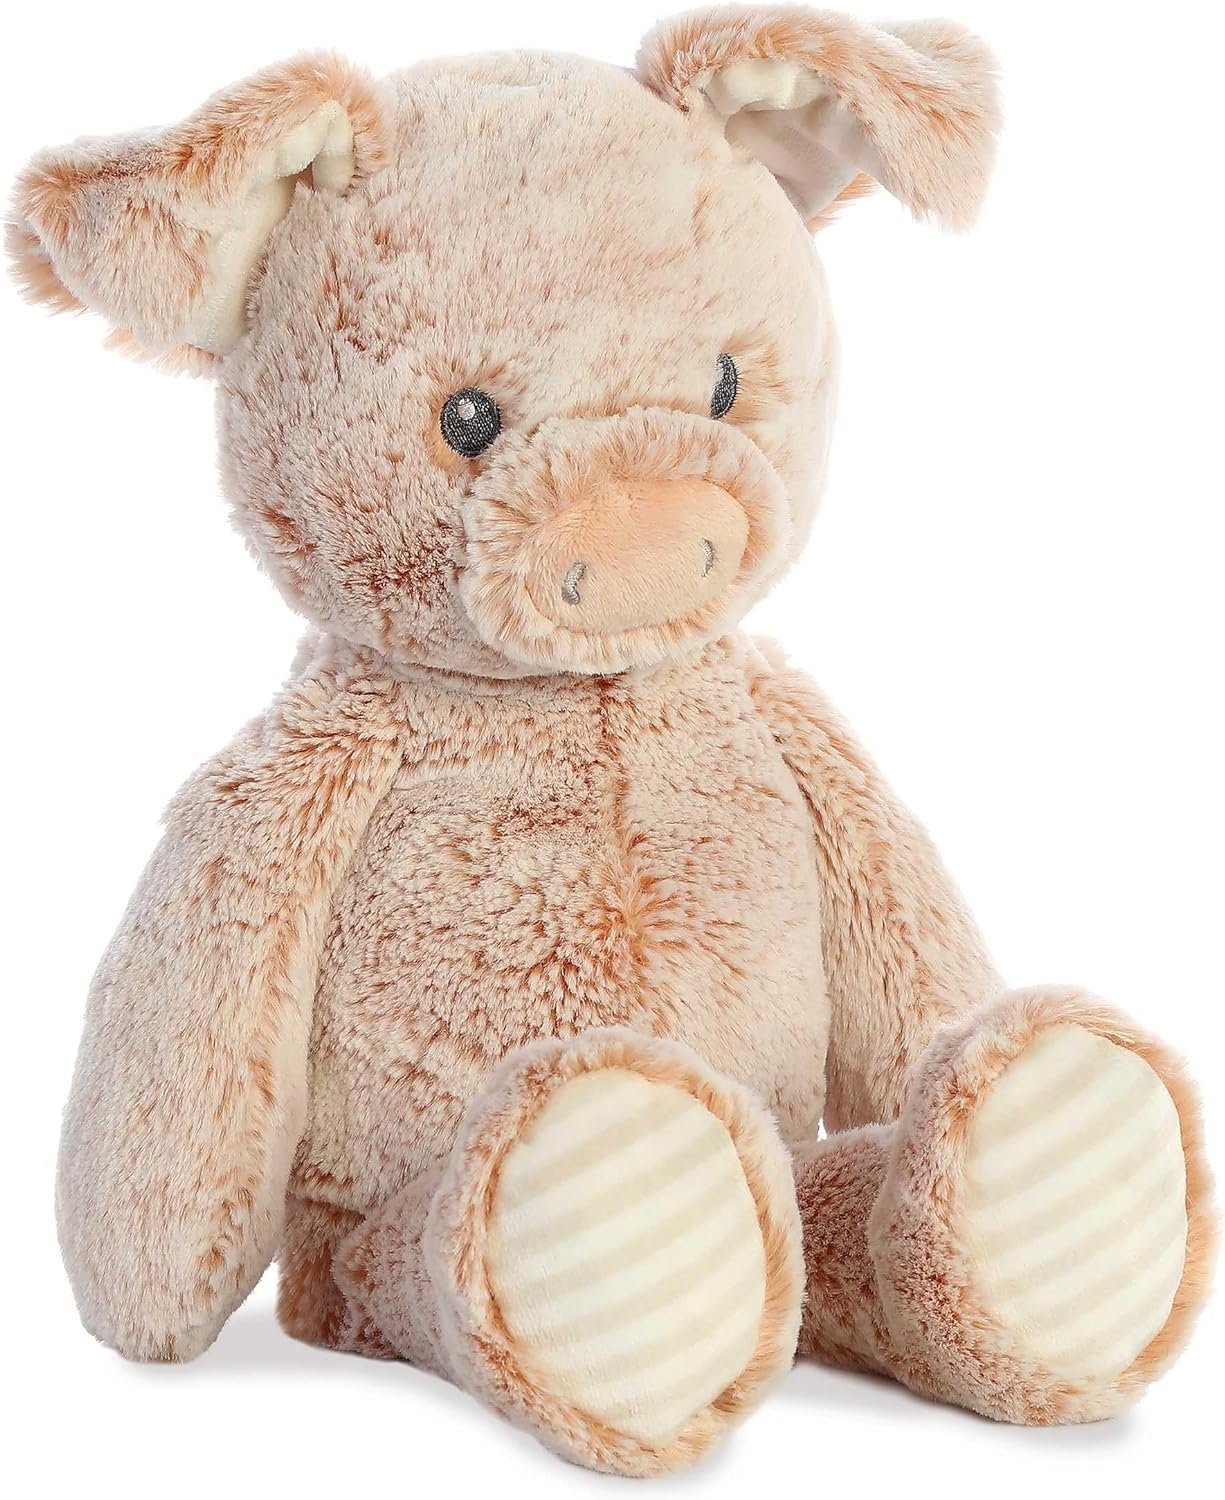 ebba™ Adorable Cuddlers™ Peppy Pig™ Baby Stuffed Animal - Security and Sleep Aid - Comforting Companion - Pink 14 Inches